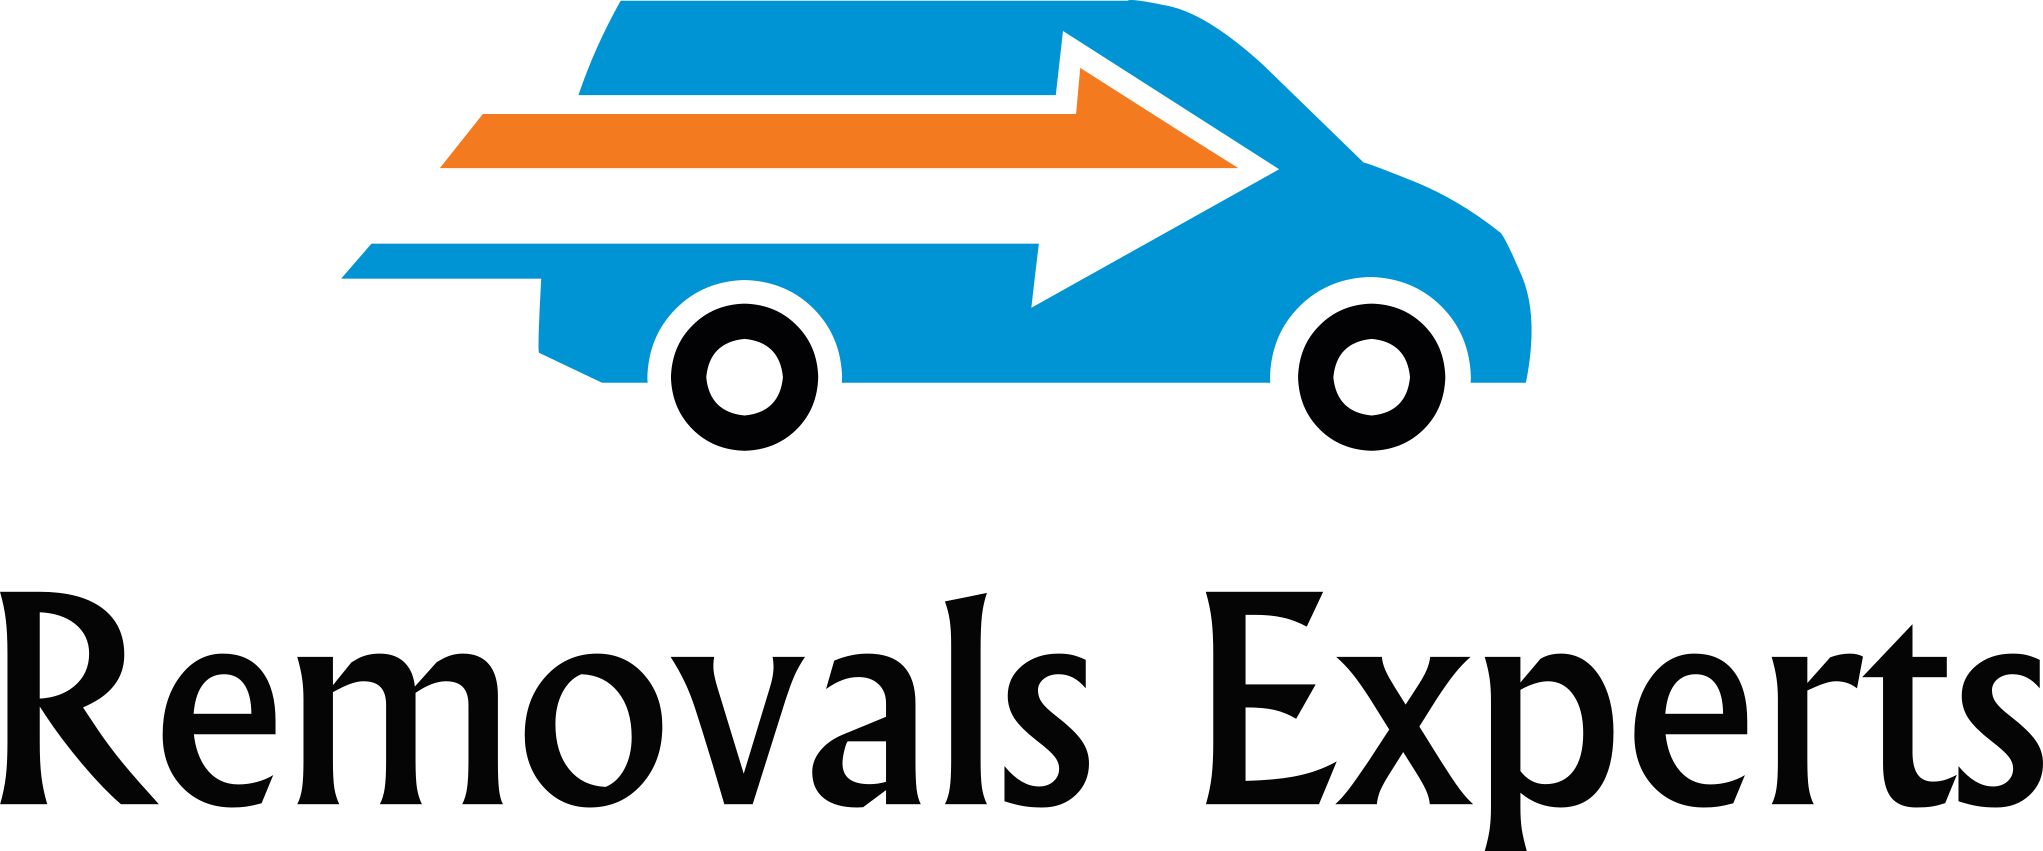 Removals Experts